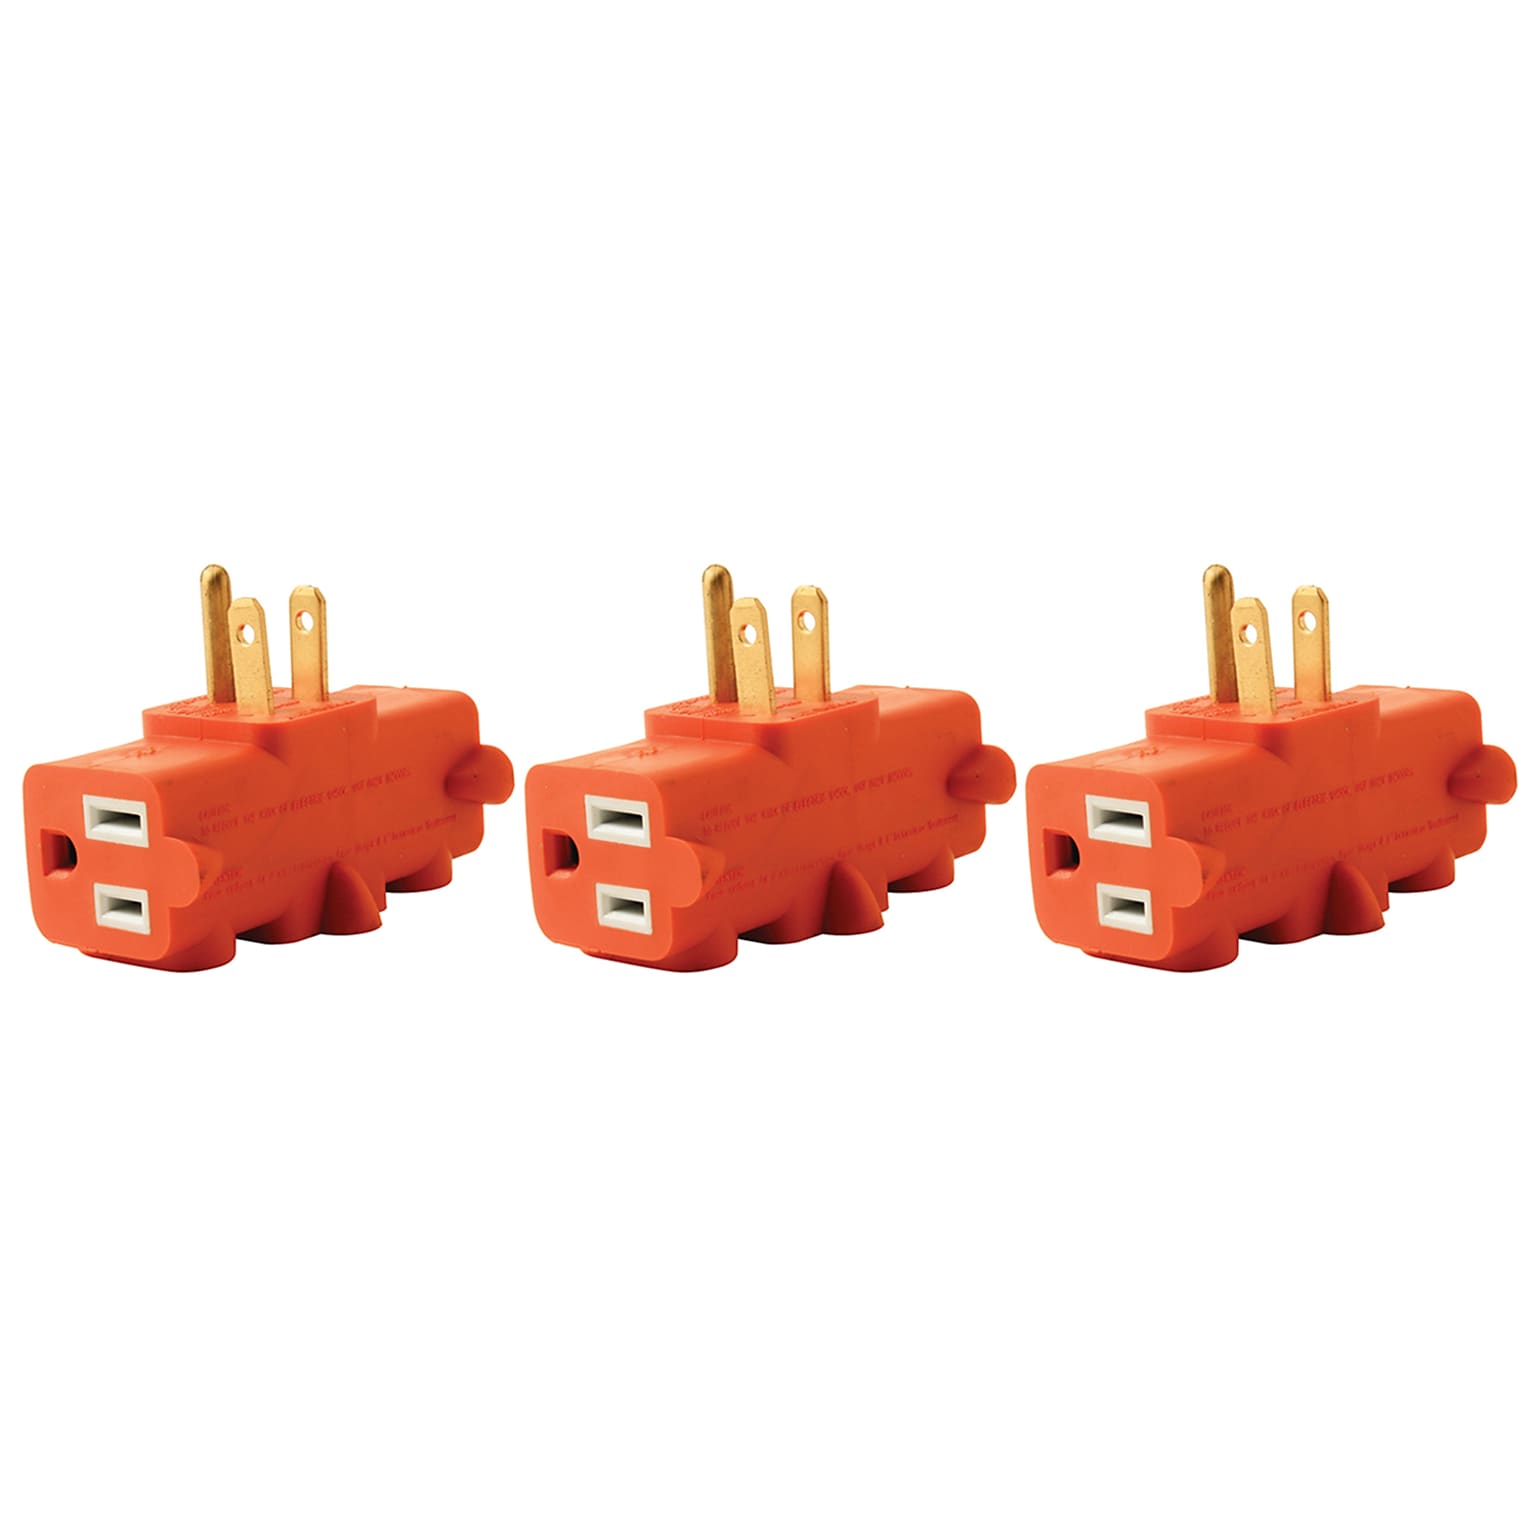 Axis 3-Outlet Heavy-Duty Grounding Adapter, Orange, 3 Pack (YLCT-10)